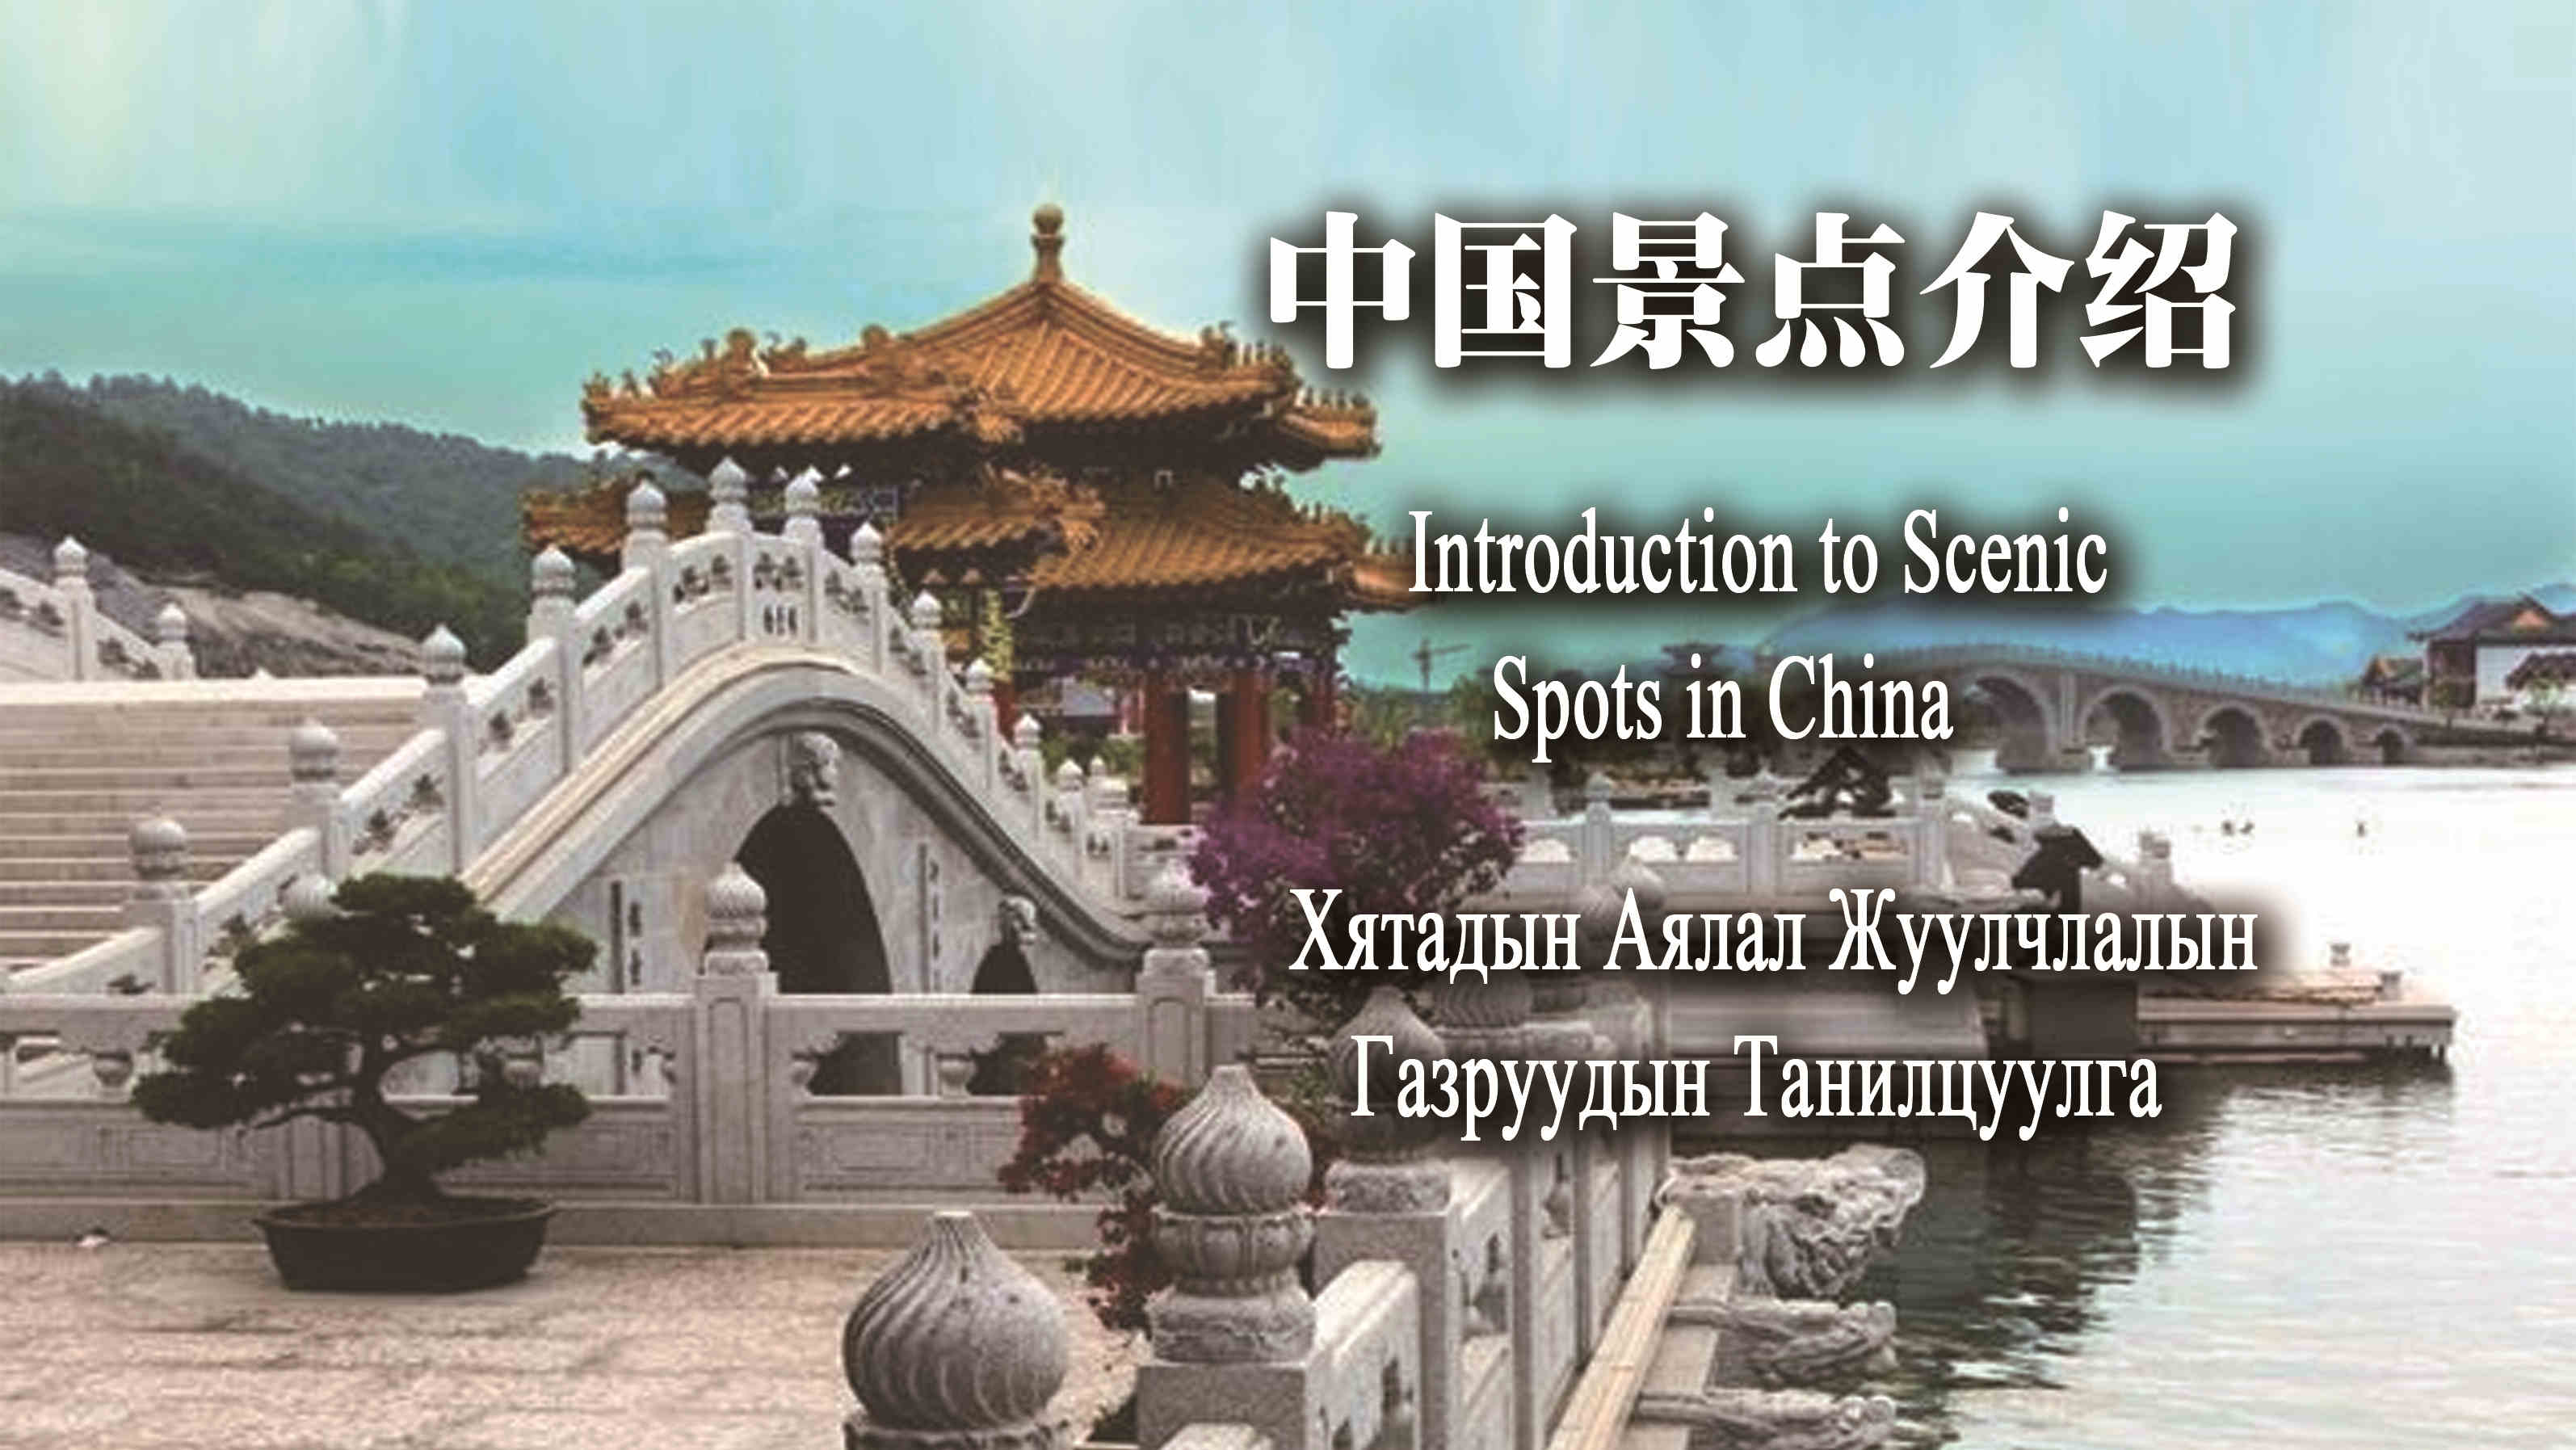 Introduction to Snciec Spot in China